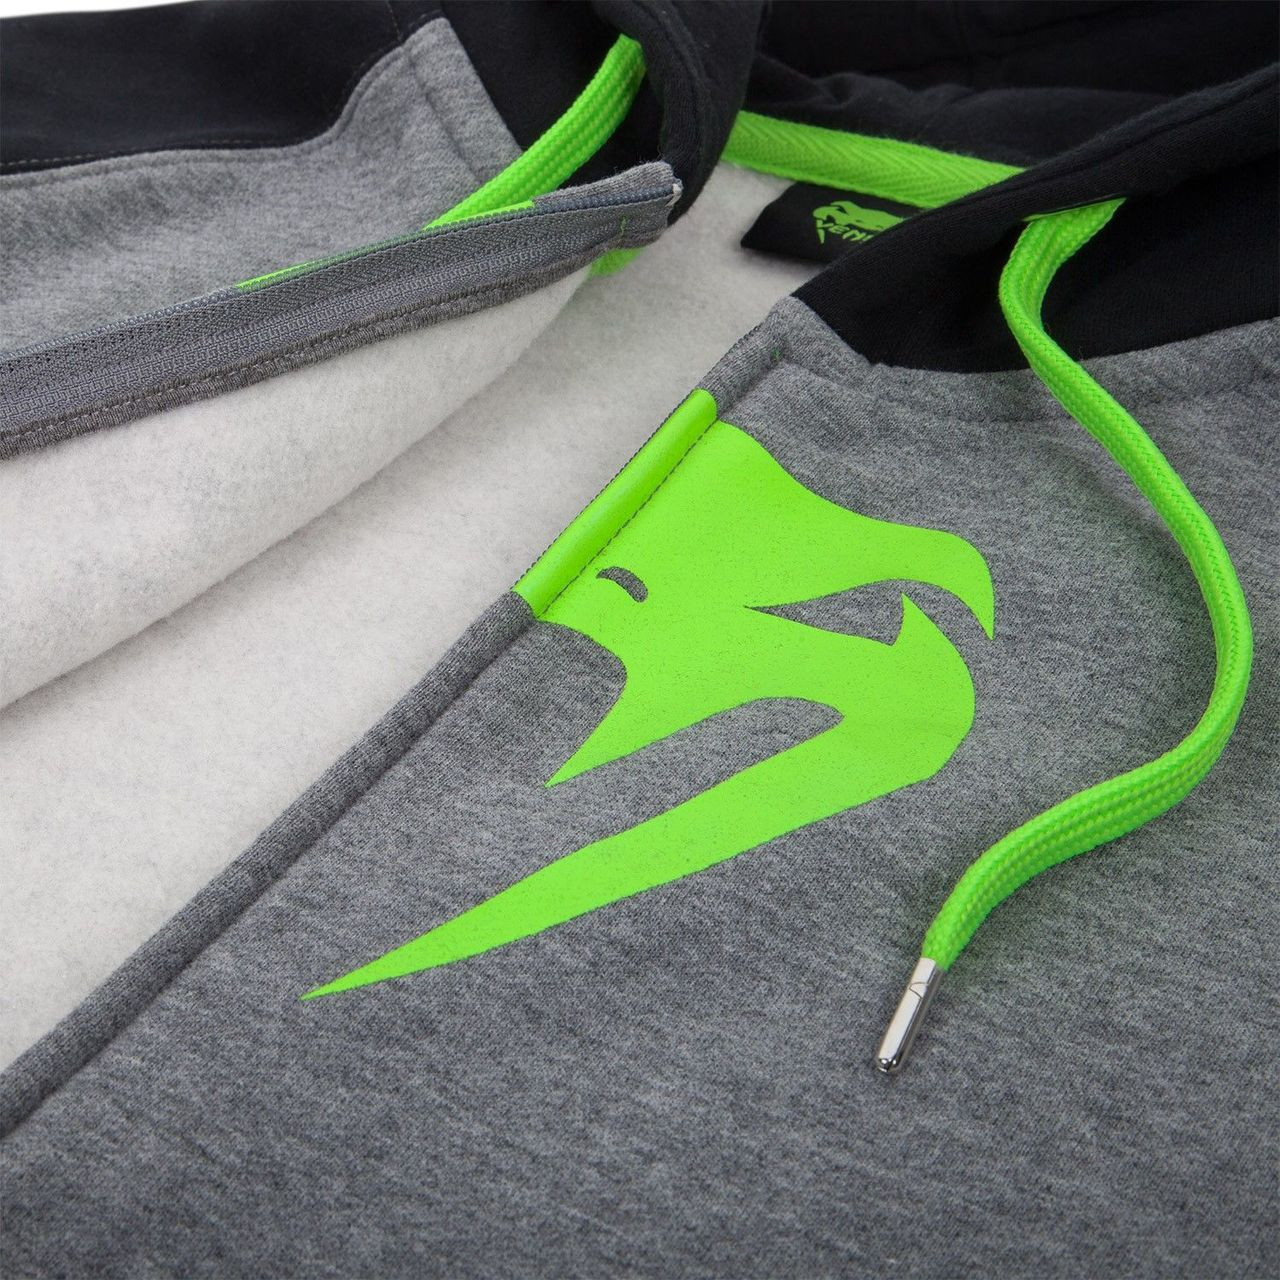 Venum Infinity Hoody designed for women.  Available at www.thejiujitsushop.com

Order now for free shipping across the store!